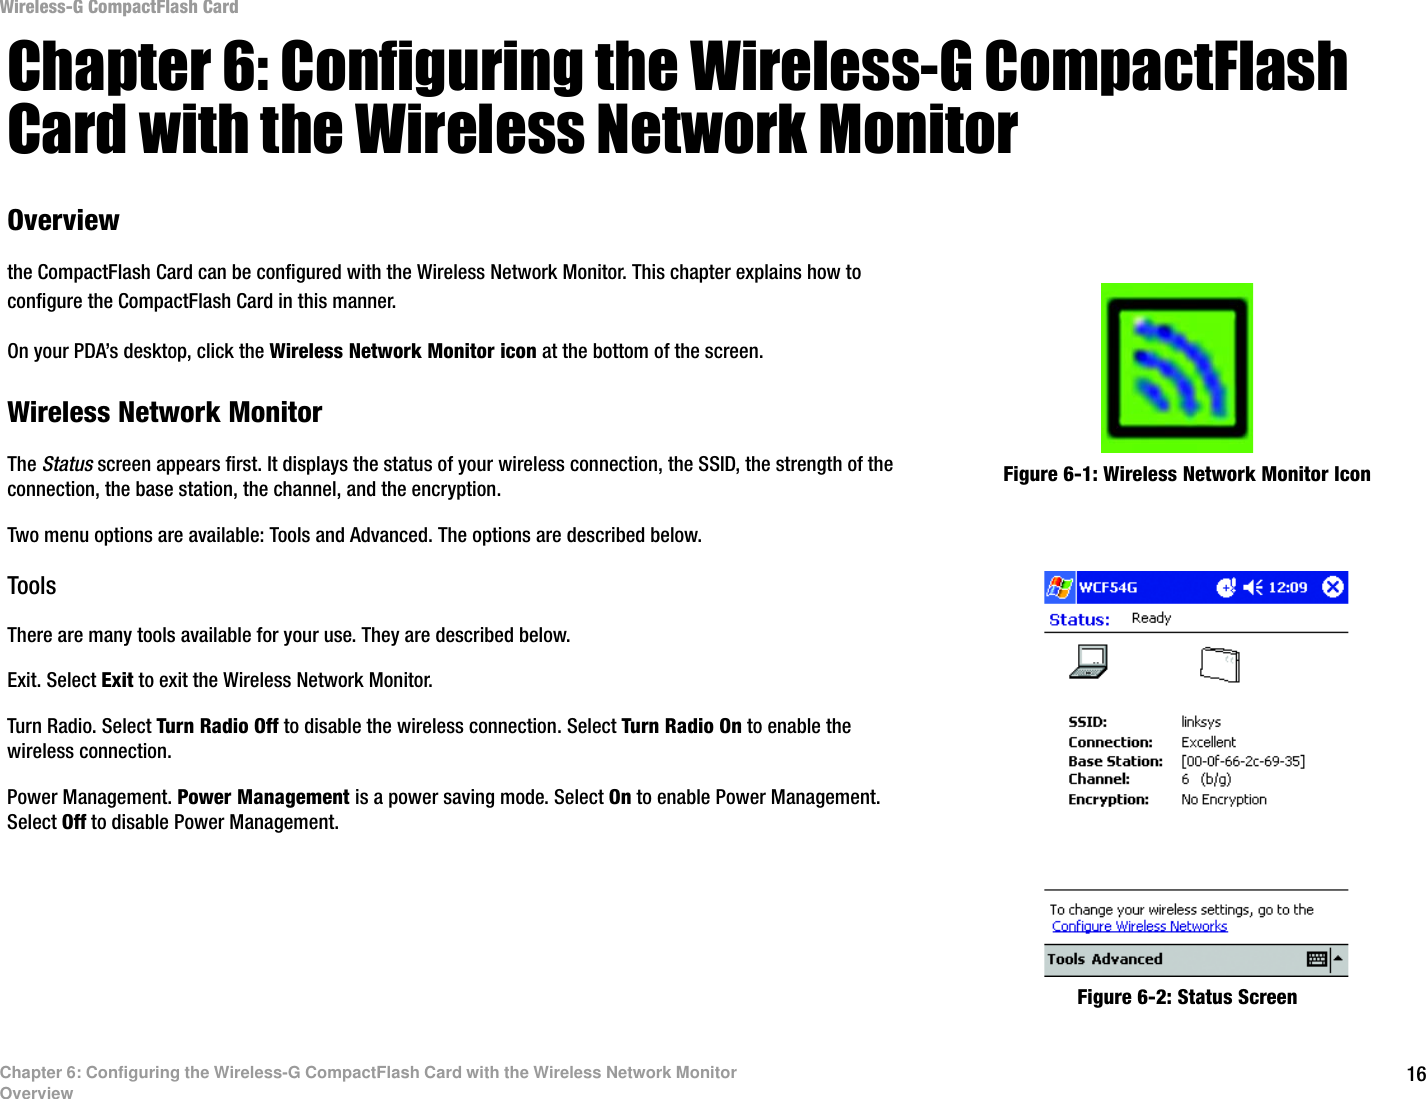 16Chapter 6: Configuring the Wireless-G CompactFlash Card with the Wireless Network MonitorOverviewWireless-G CompactFlash CardChapter 6: Configuring the Wireless-G CompactFlash Card with the Wireless Network MonitorOverviewthe CompactFlash Card can be configured with the Wireless Network Monitor. This chapter explains how to configure the CompactFlash Card in this manner.On your PDA’s desktop, click the Wireless Network Monitor icon at the bottom of the screen.Wireless Network MonitorThe Status screen appears first. It displays the status of your wireless connection, the SSID, the strength of the connection, the base station, the channel, and the encryption. Two menu options are available: Tools and Advanced. The options are described below.ToolsThere are many tools available for your use. They are described below.Exit. Select Exit to exit the Wireless Network Monitor.Turn Radio. Select Turn Radio Off to disable the wireless connection. Select Turn Radio On to enable the wireless connection.Power Management. Power Management is a power saving mode. Select On to enable Power Management. Select Off to disable Power Management. Figure 6-1: Wireless Network Monitor IconFigure 6-2: Status Screen